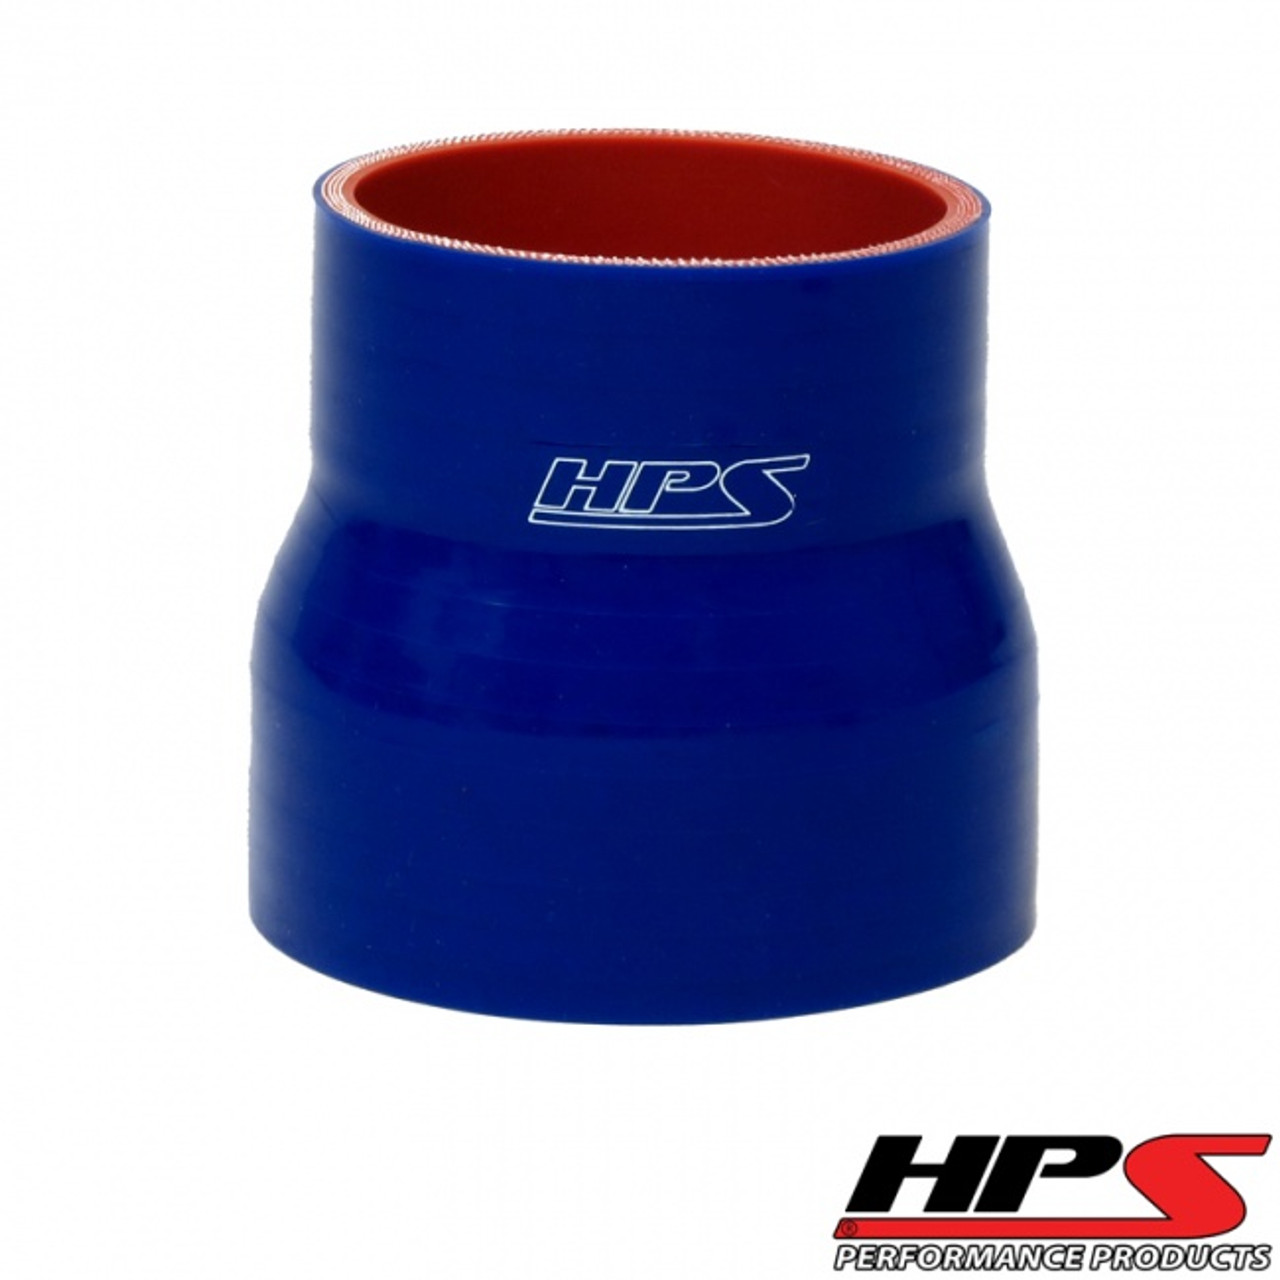 HPS 4 Ply Reinforced Straight Silicone Hose Reducer/Adapter 3.5" x 4" ID Blue